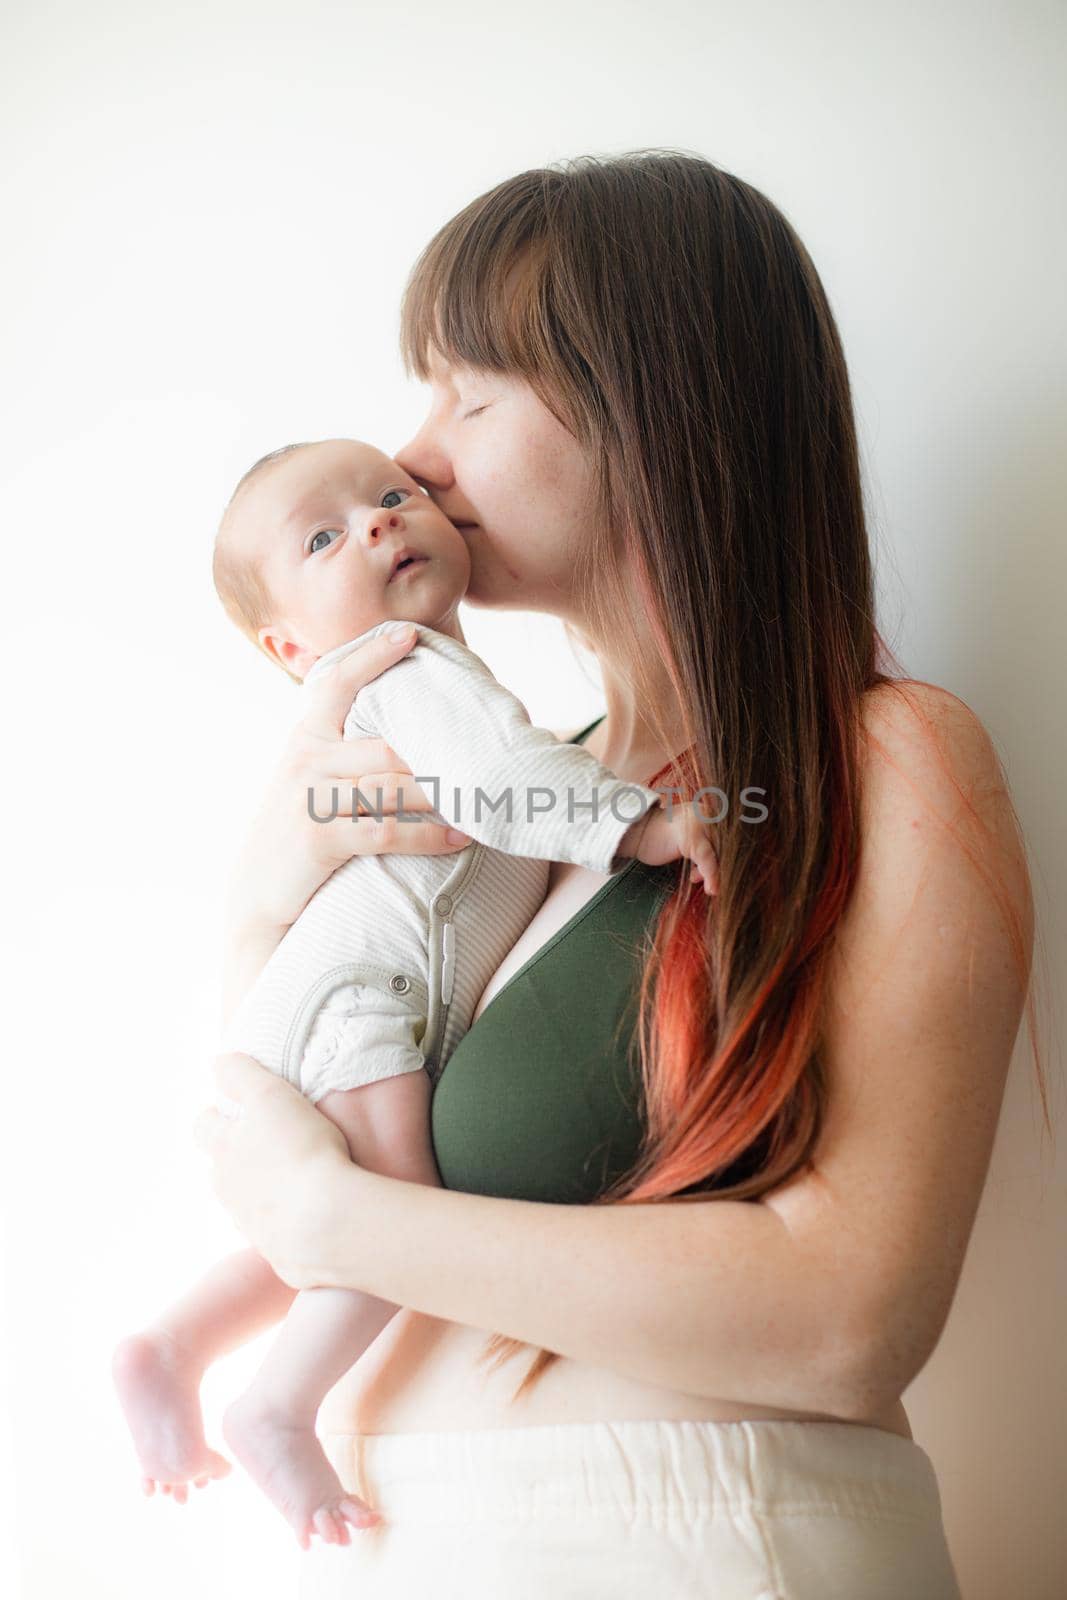 Mom holds the baby in her arms lifestyle . Mother's love for her son. A newborn baby. by alenka2194